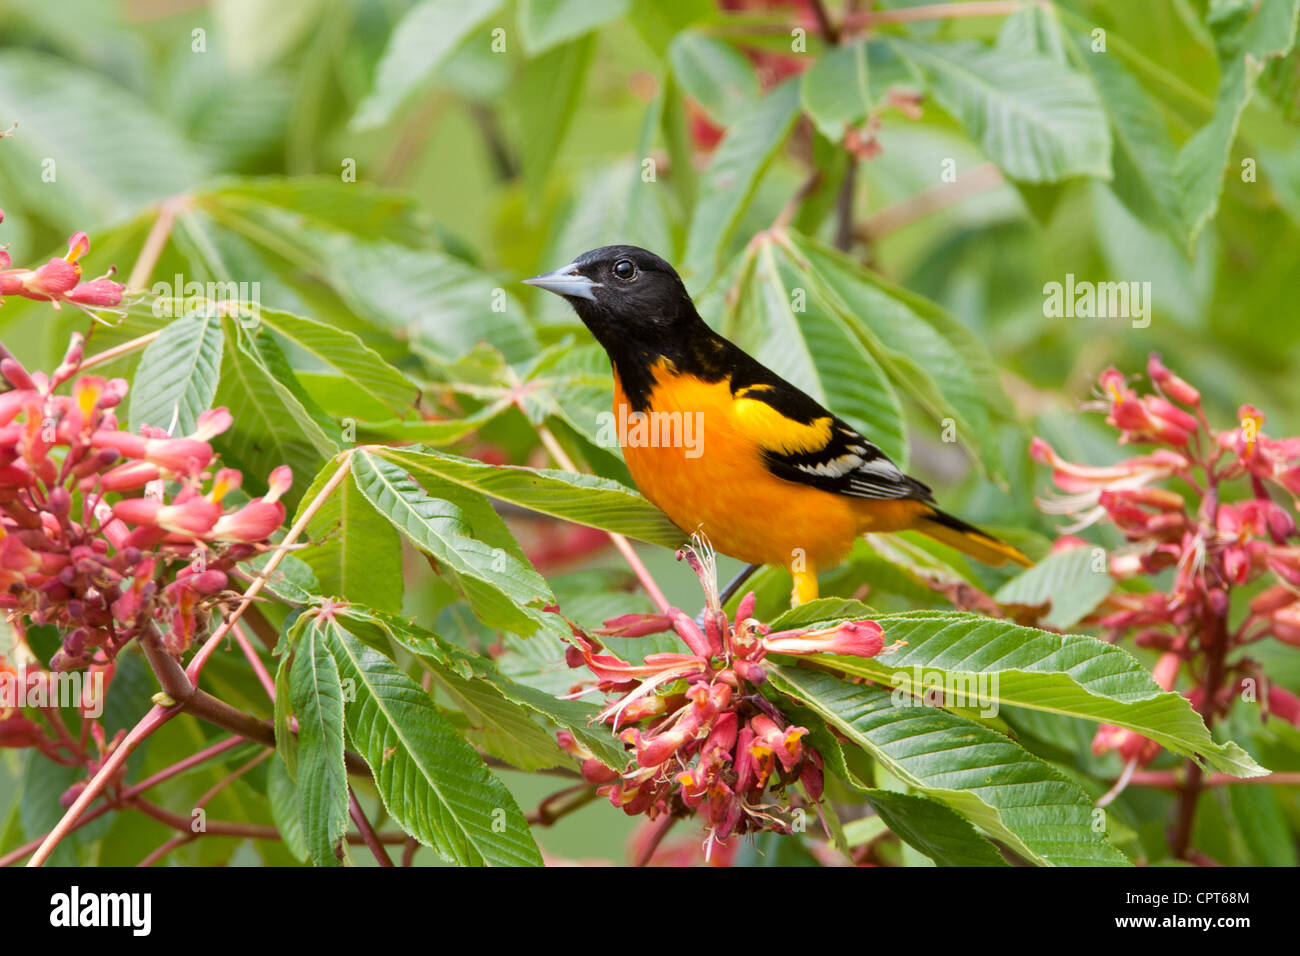 Baltimore Oriole bird songbird perching perched in Red Buckeye Tree Blossoms flowers blooms Stock Photo